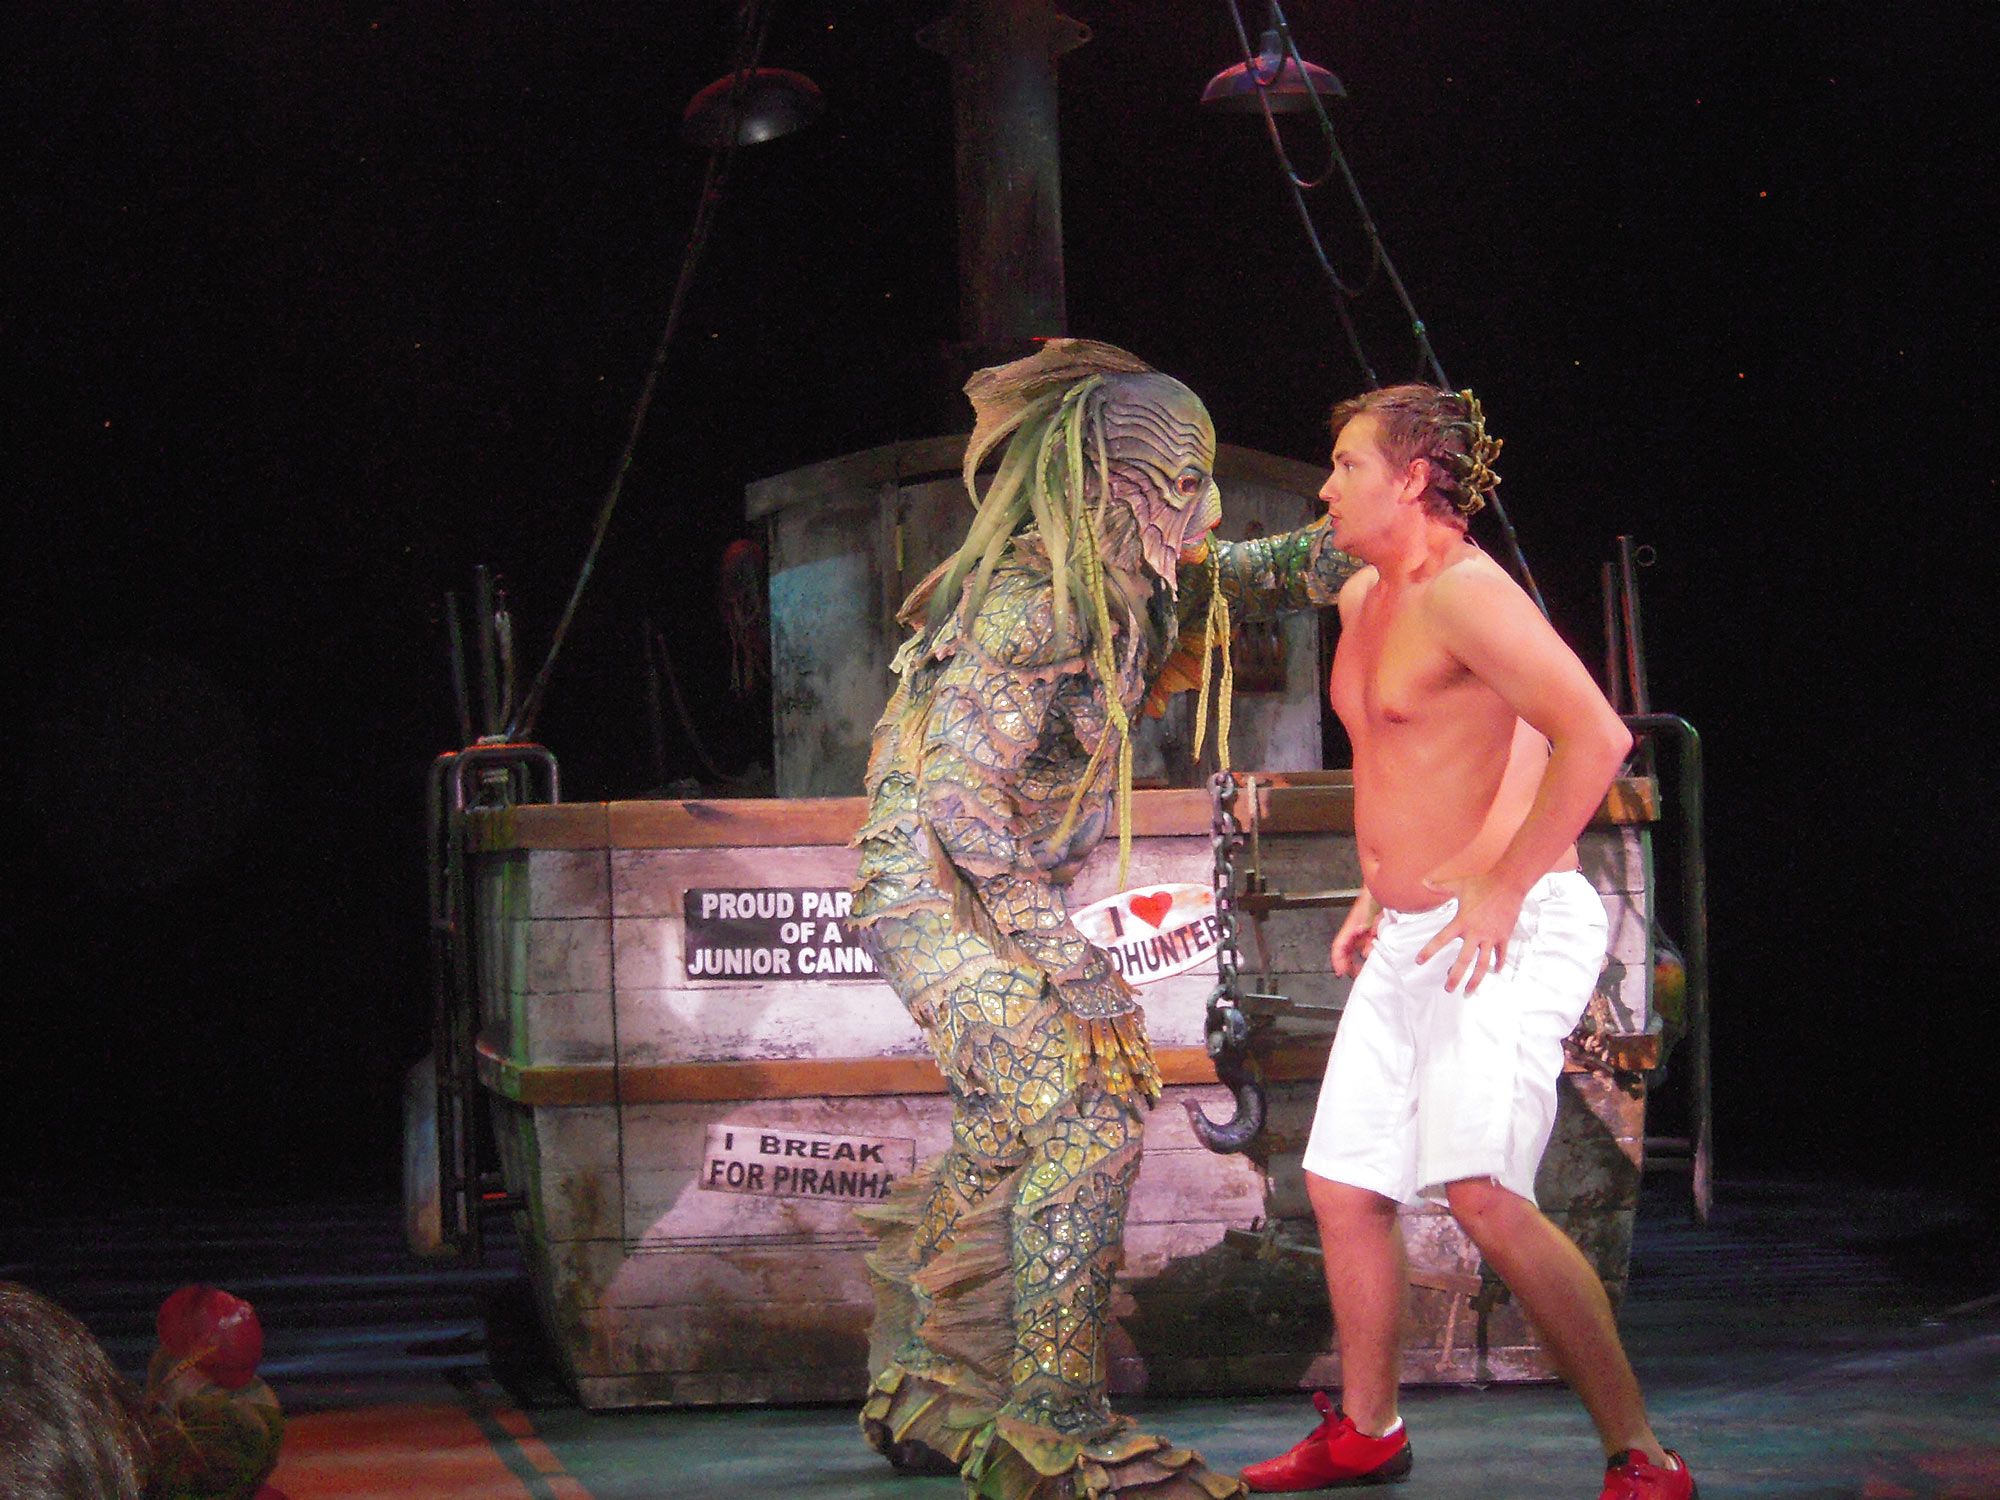 The Creature from the Black Lagoon at Universal Studios